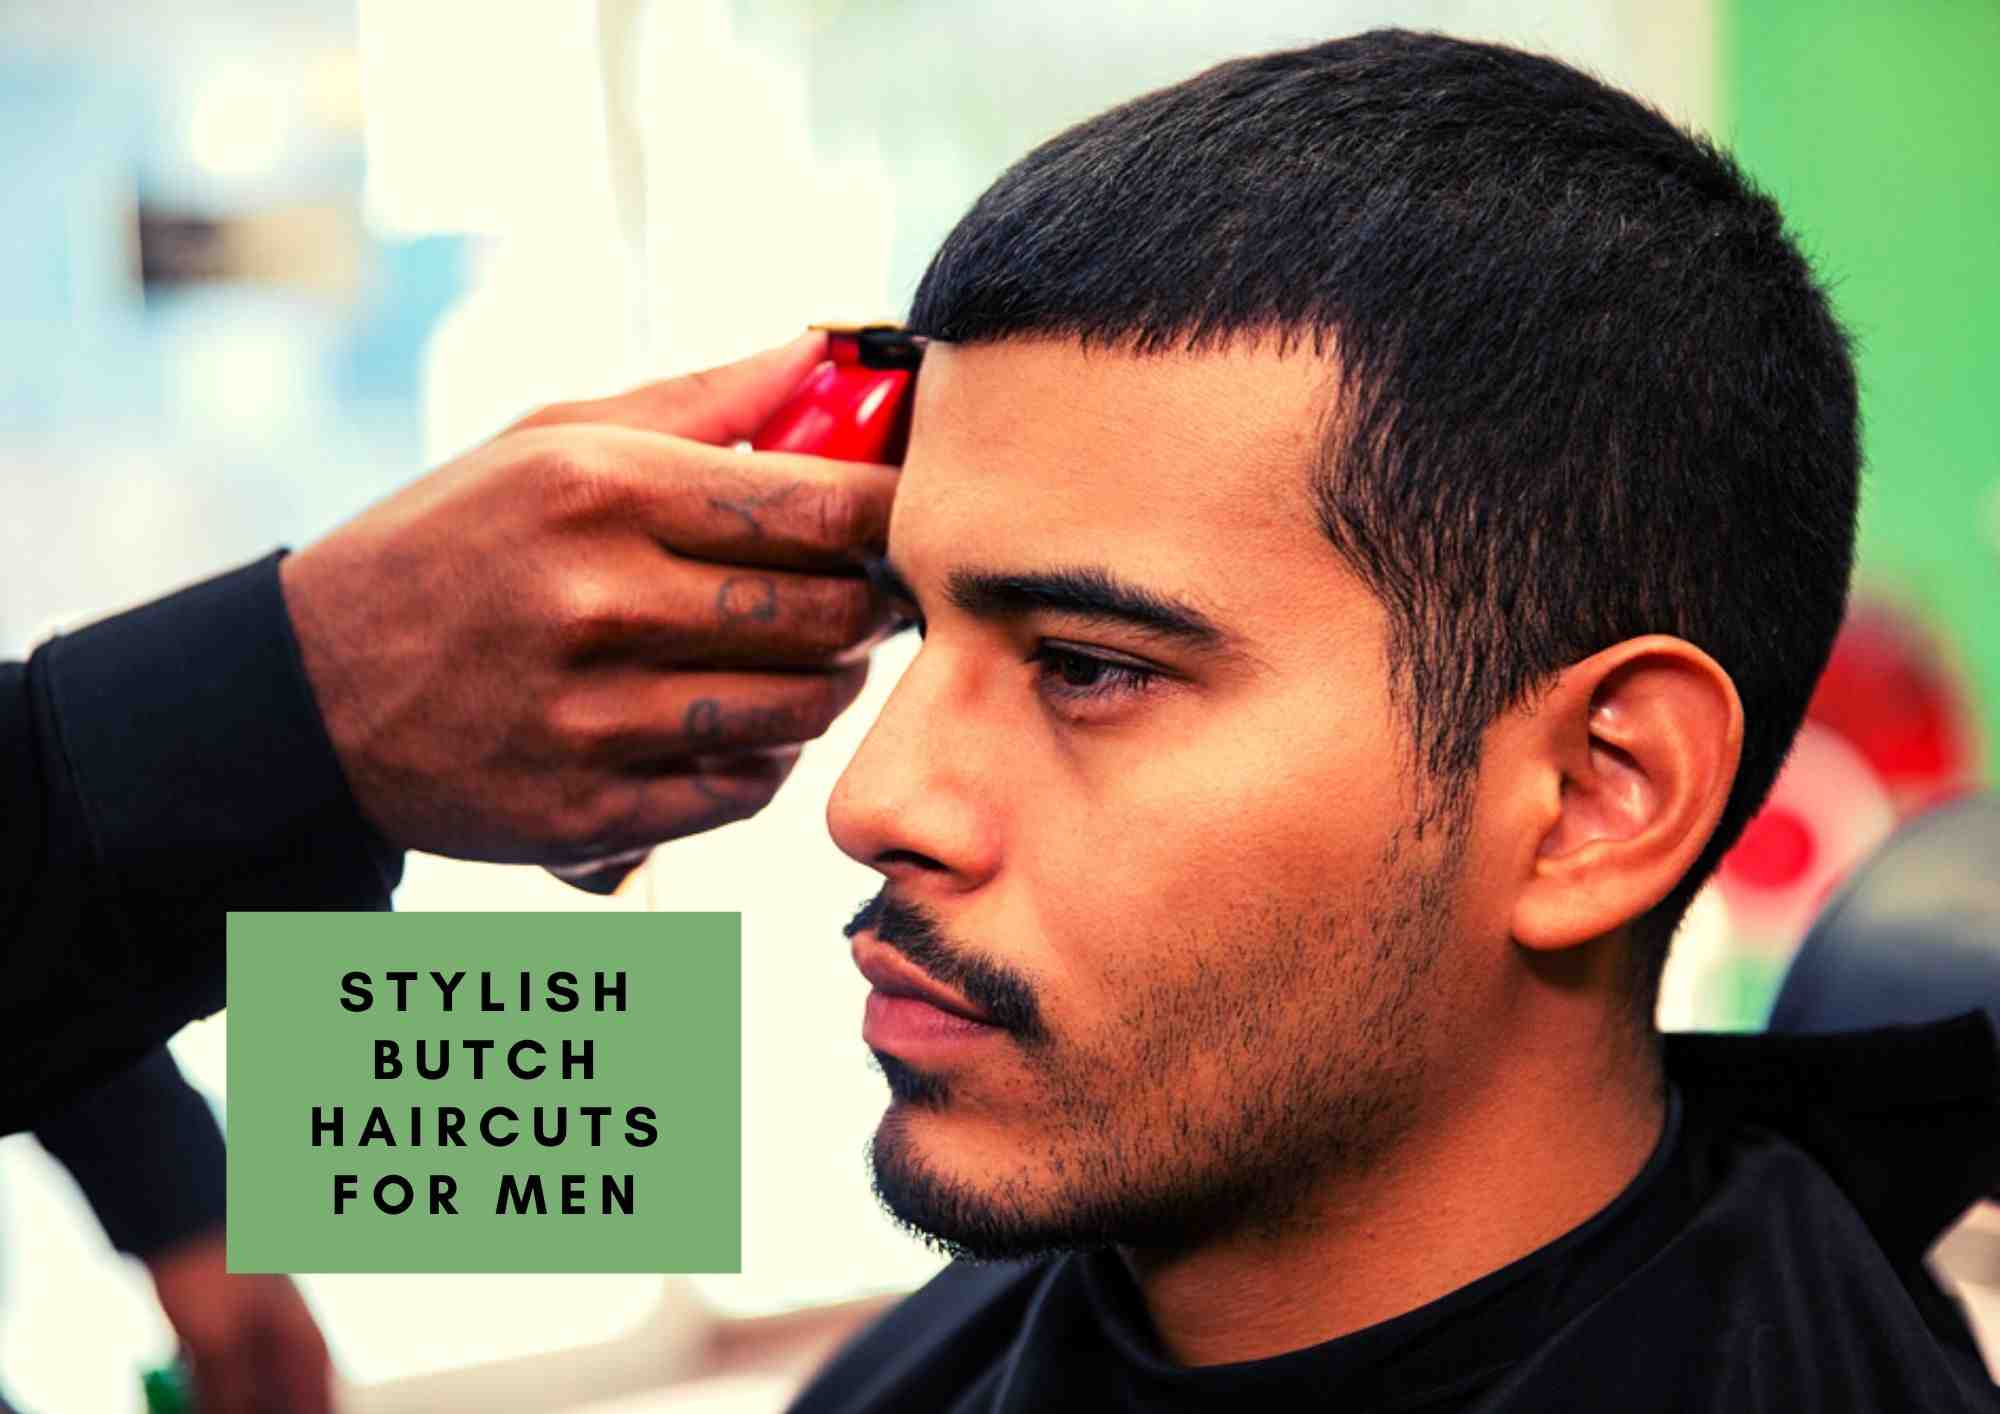 Clipkulture | Low Cut Style for Relaxed Hair